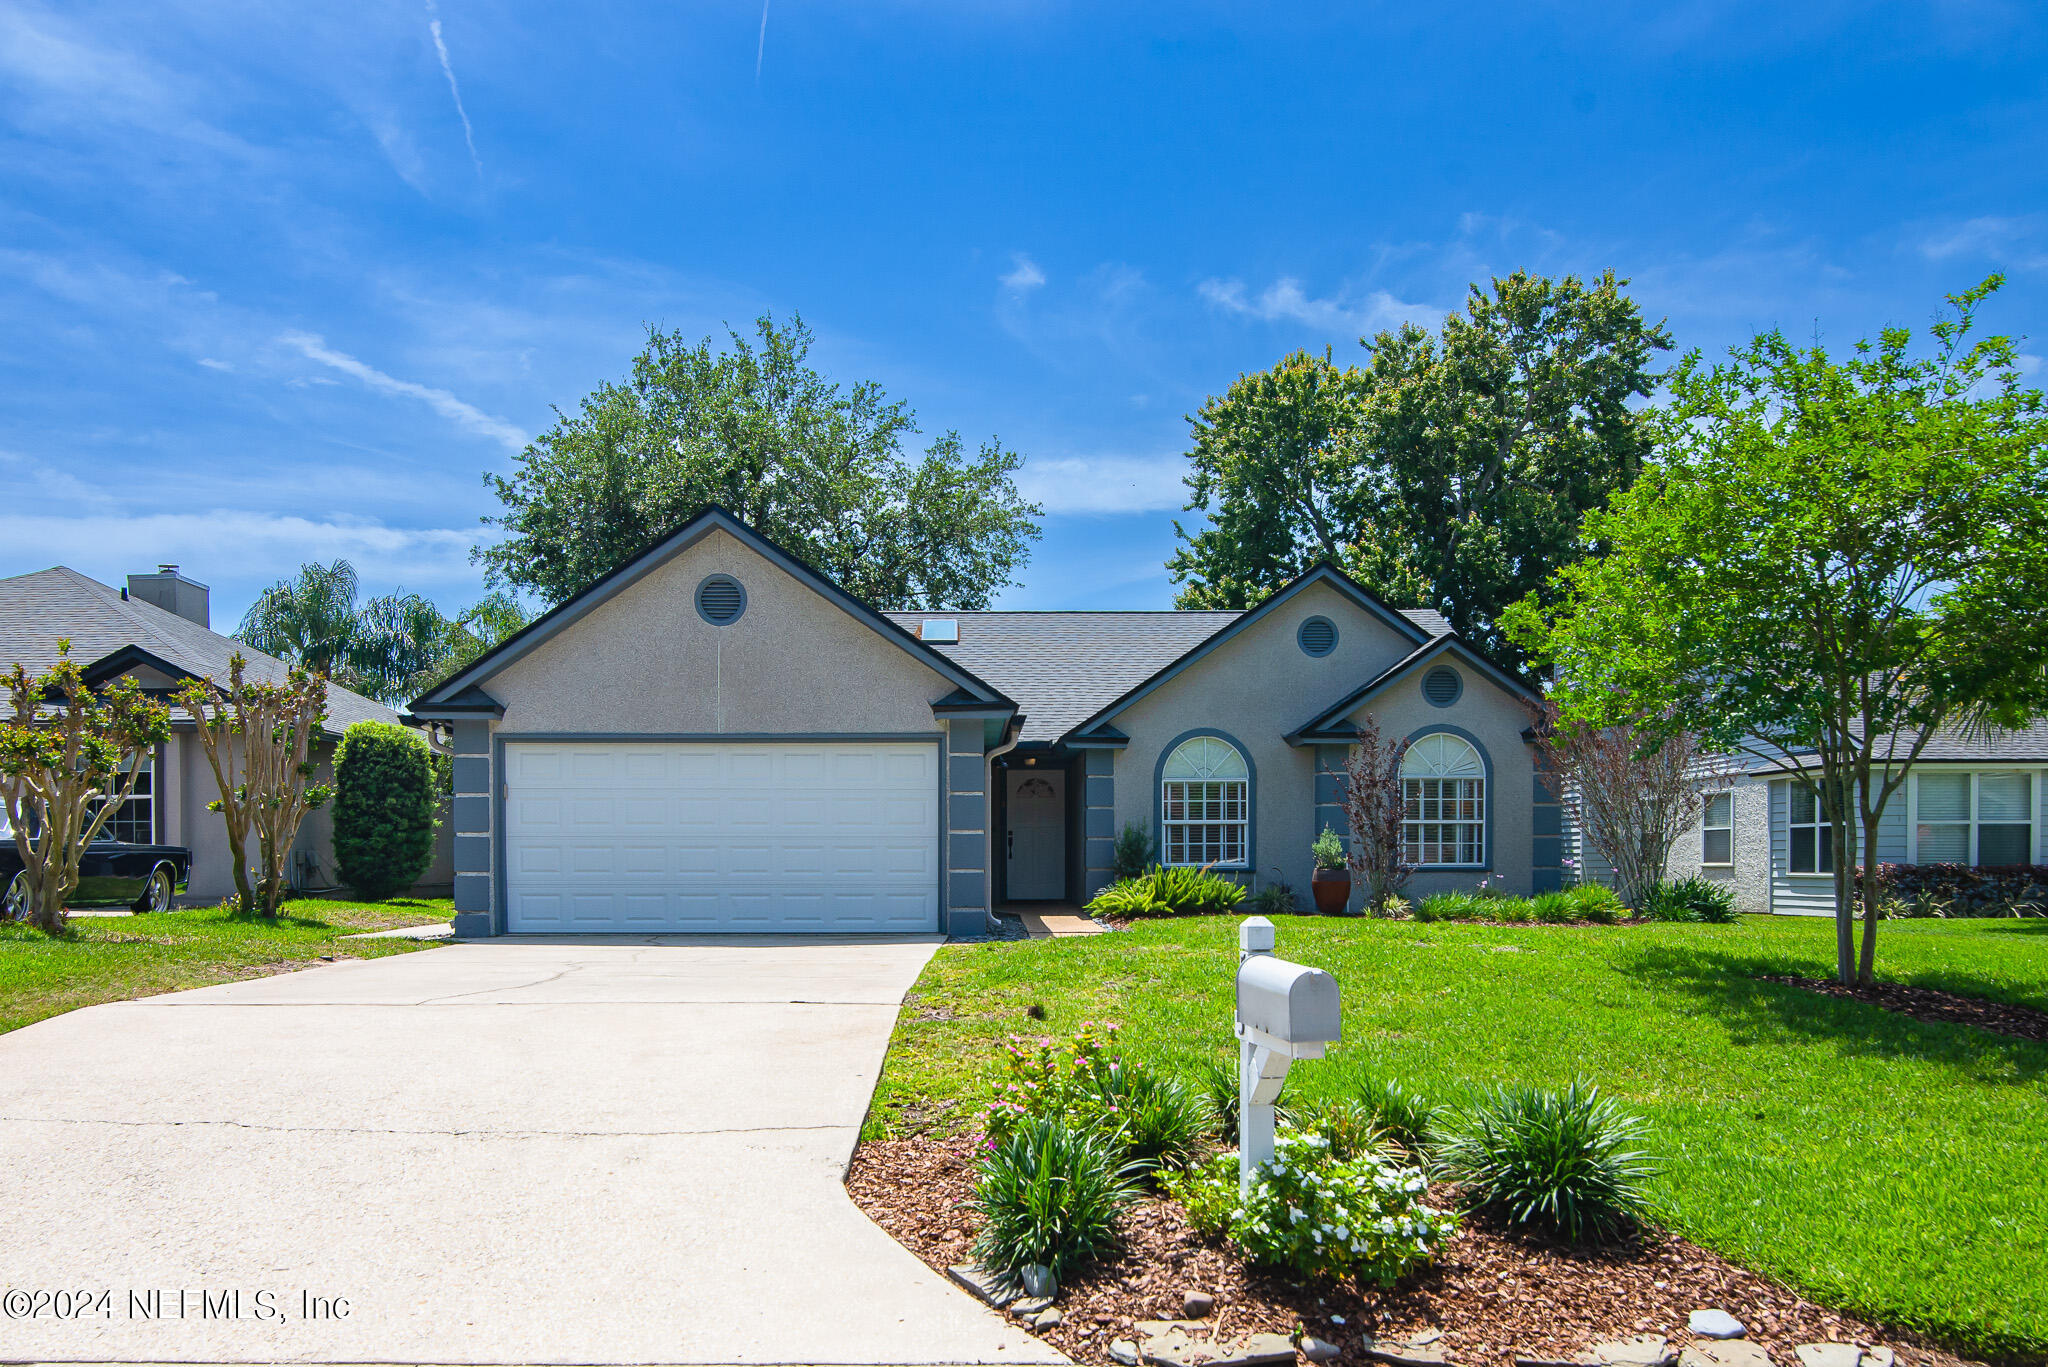 Ponte Vedra Beach, FL home for sale located at 503 Pheasant Run, Ponte Vedra Beach, FL 32082